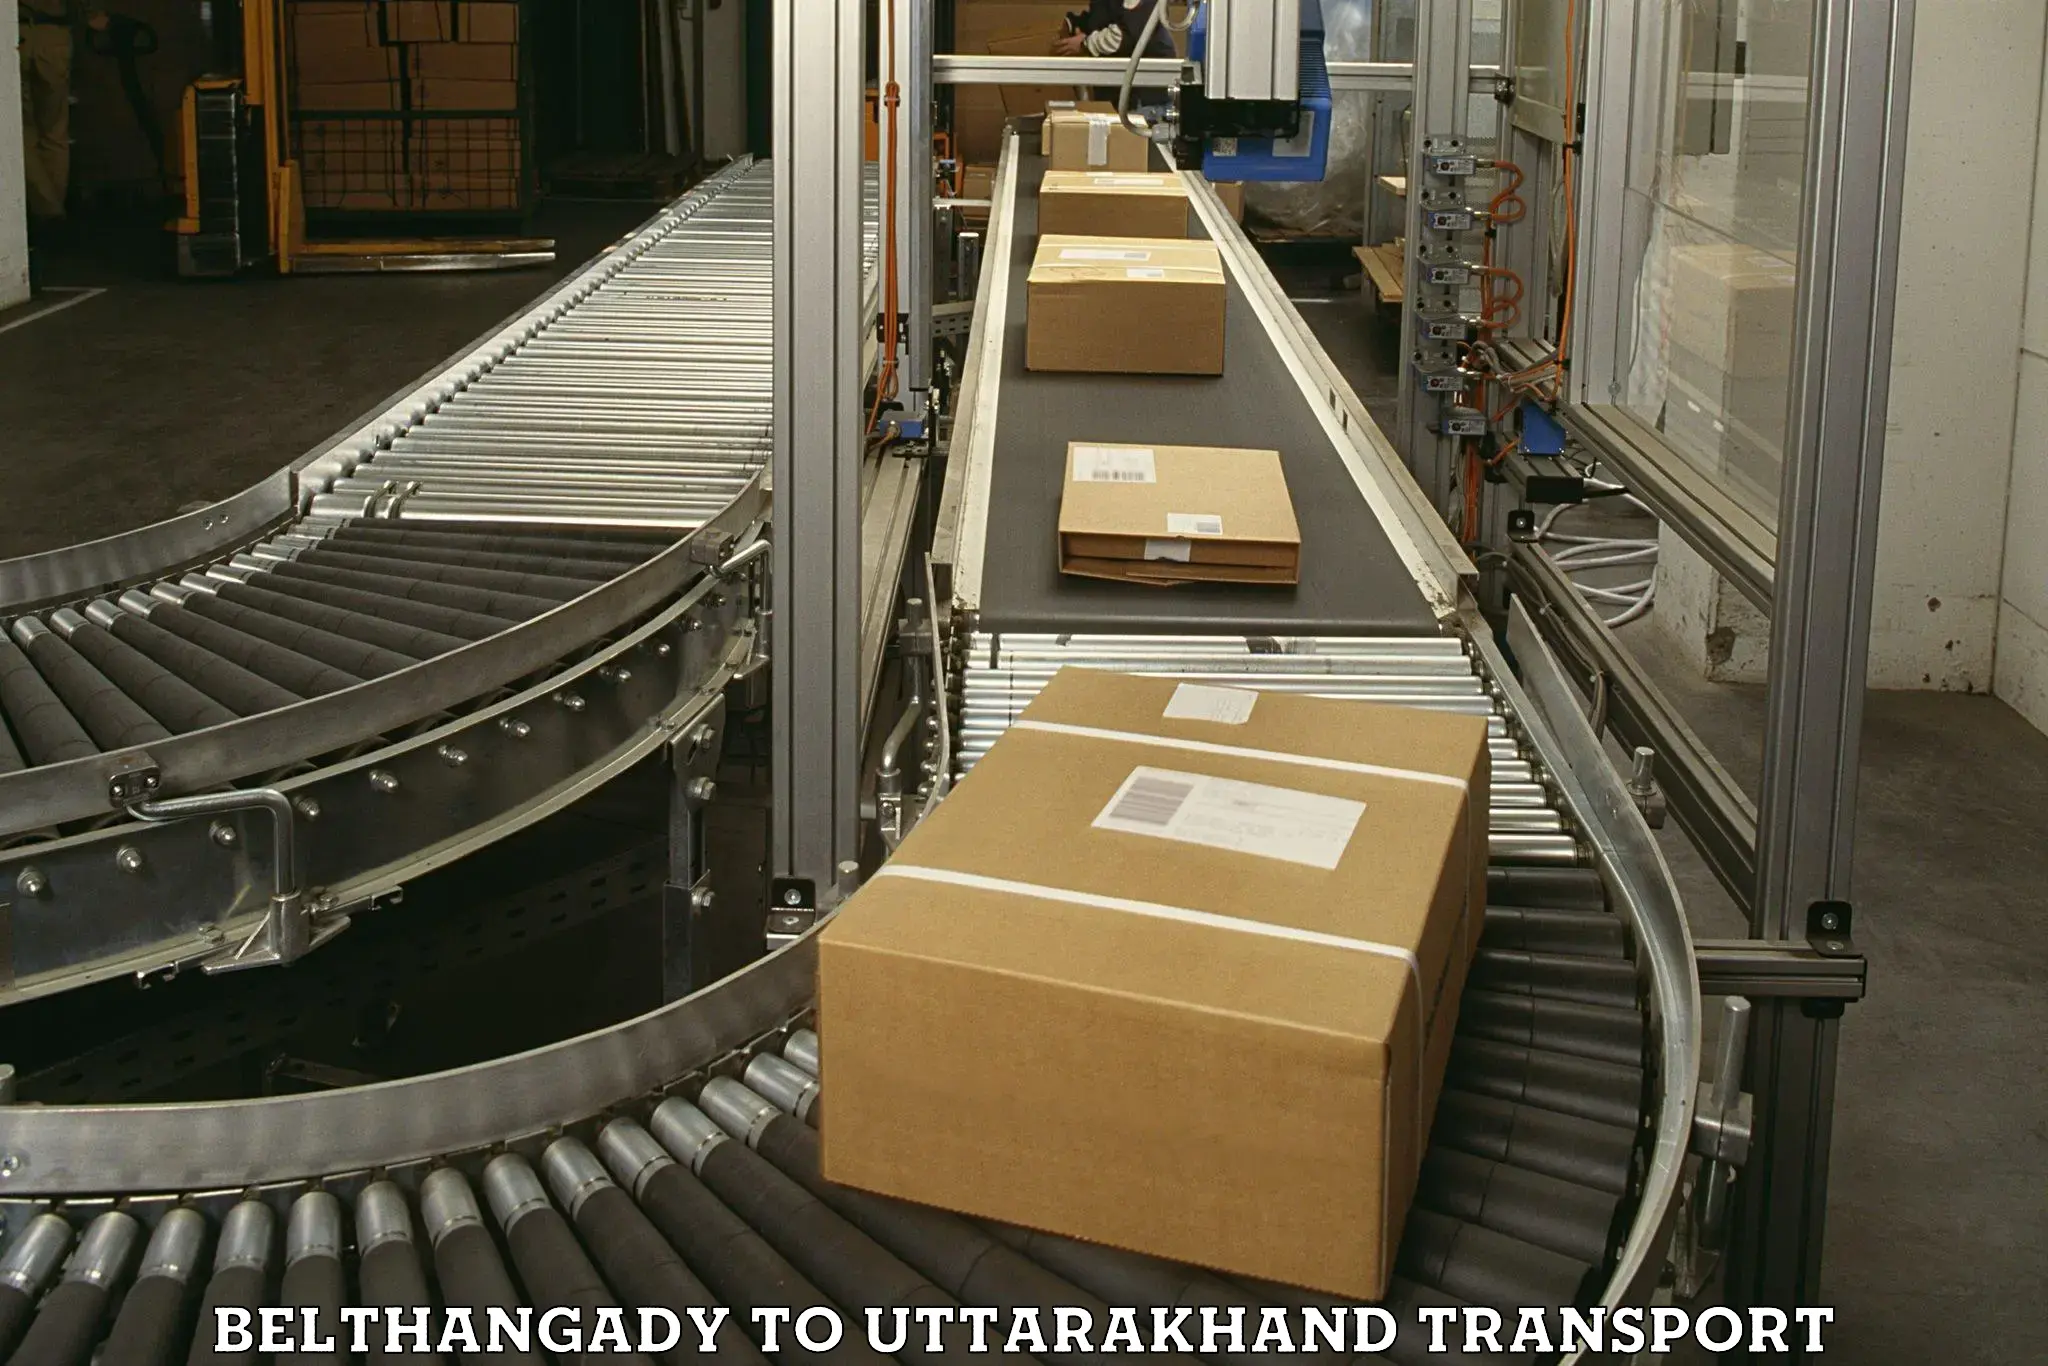 Container transport service Belthangady to IIT Roorkee